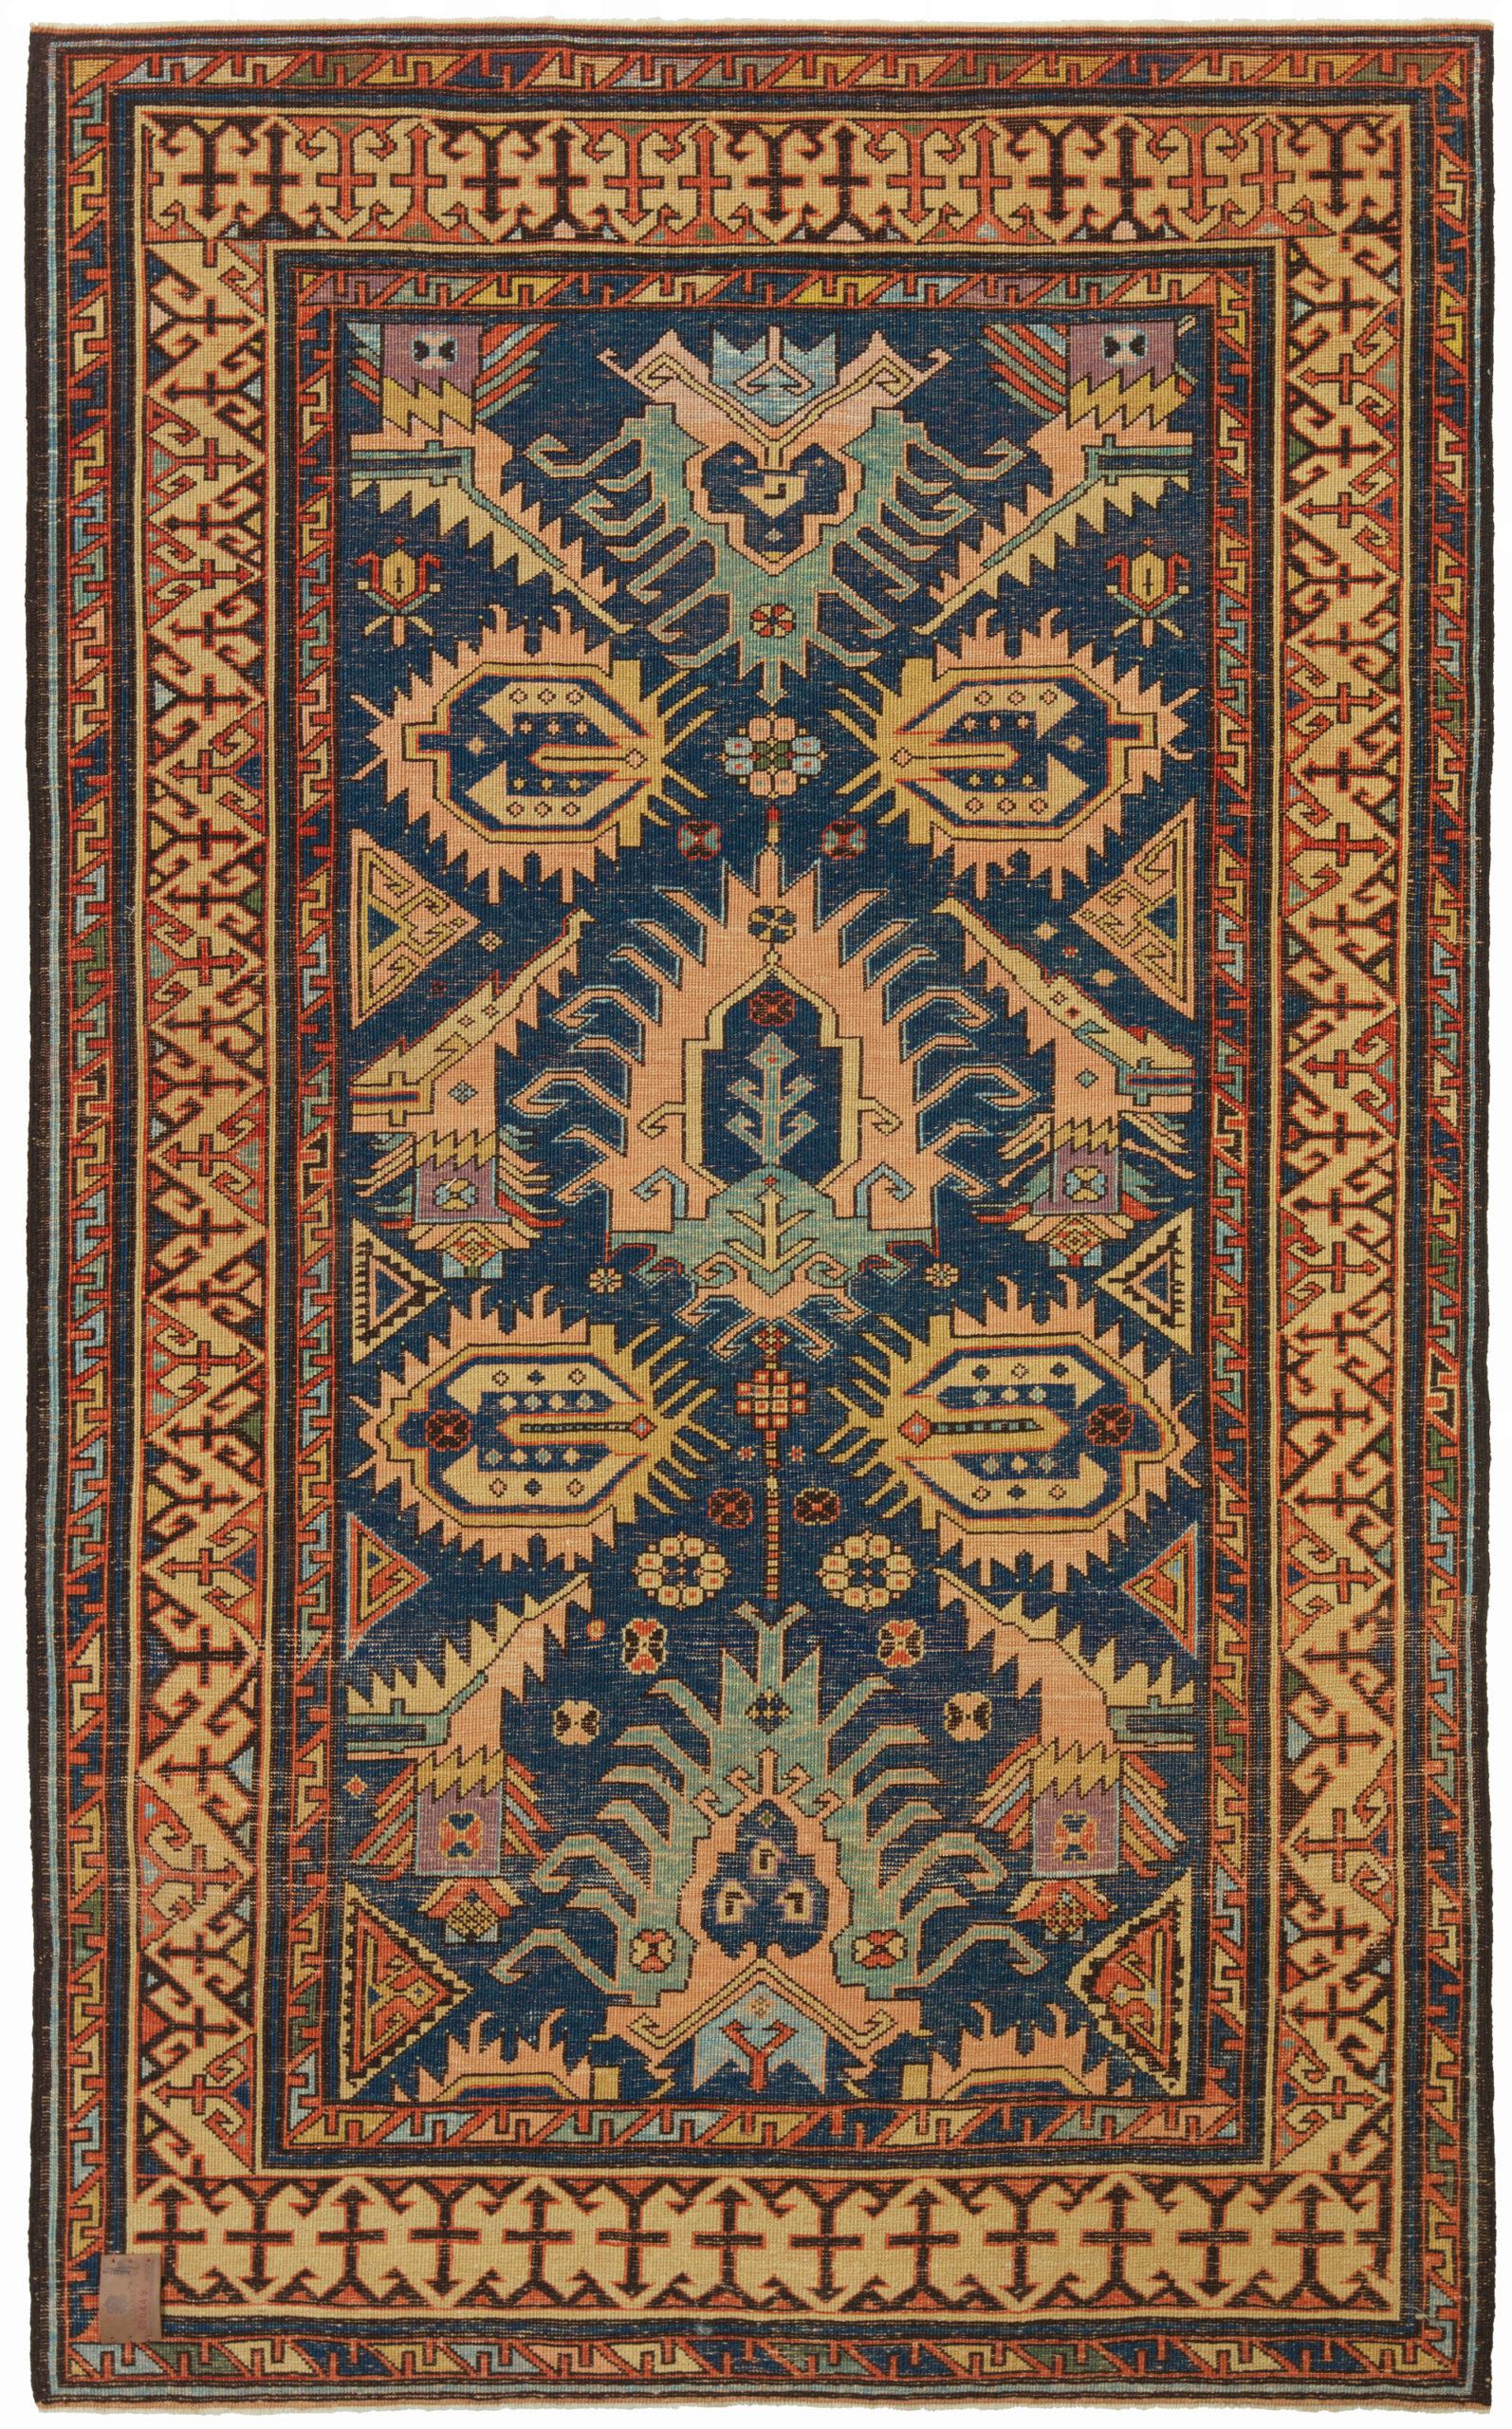 This is a Bidjov Kazak rug, designed late 19th century, is a type of handwoven rug that originated from the Caucasus region, specifically from the town of Bidjov, a few miles north of Marasali. As with many place names, the attribution to Bidjov is